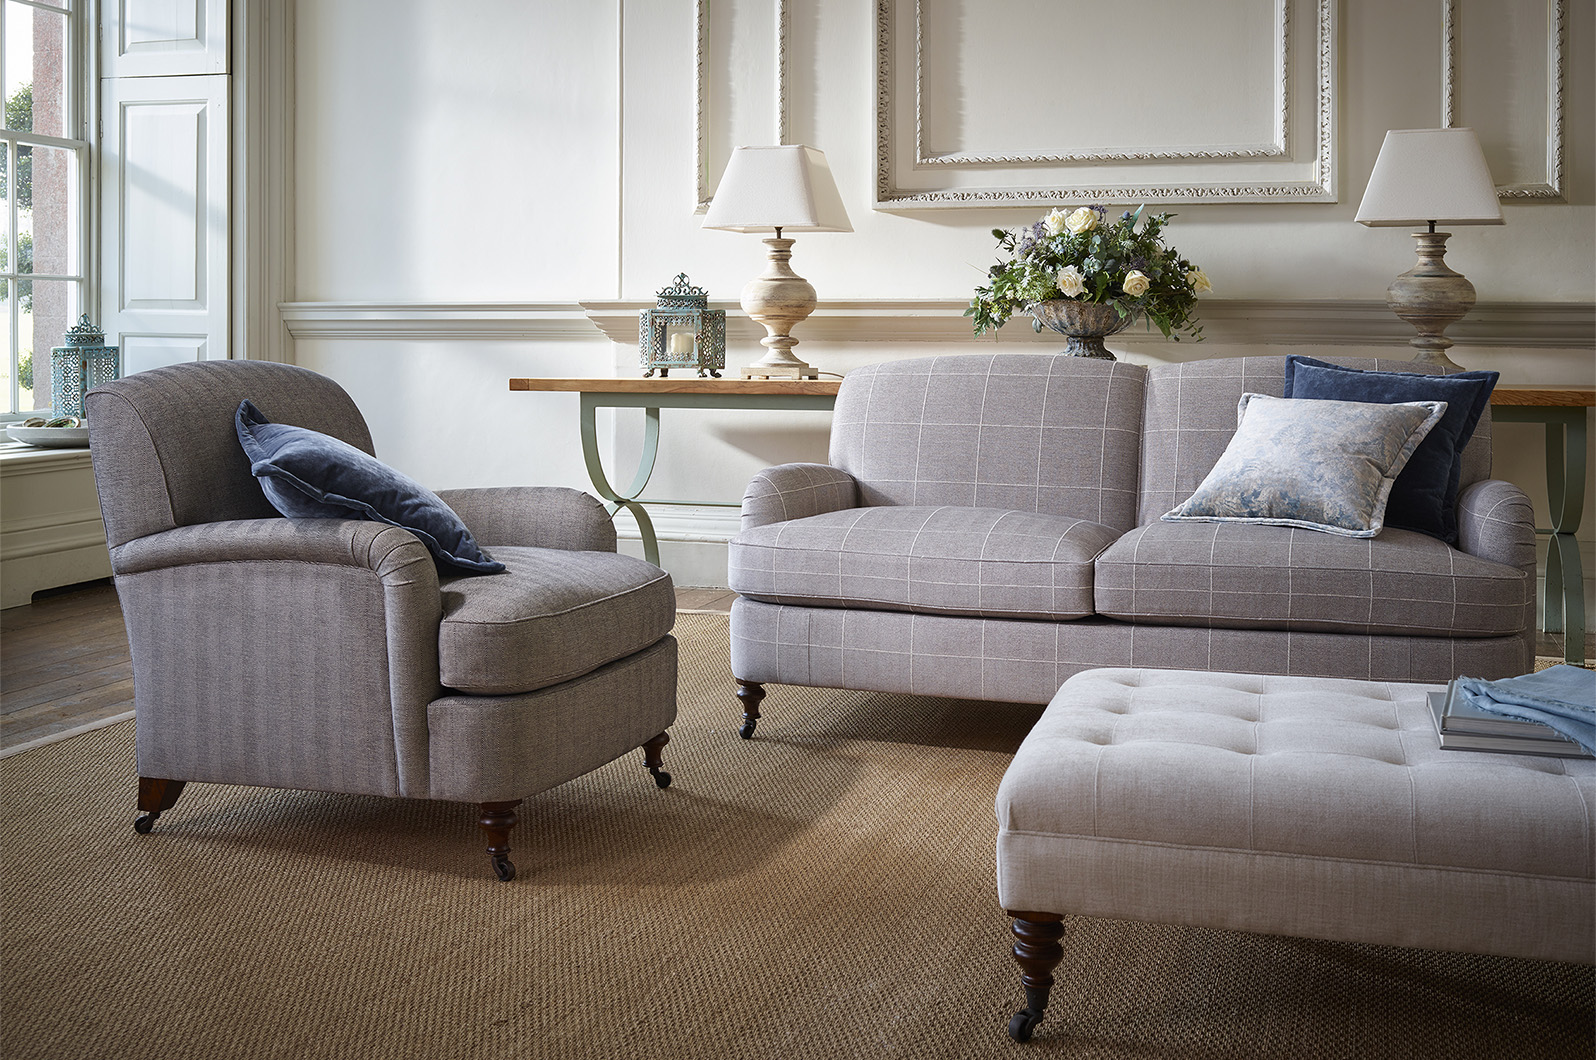 Kingcome Sofas location shoot, shot at Boconnoc in Cornwall whose architectural style and space created a beautiful setting for this high-end, hand crafted product.